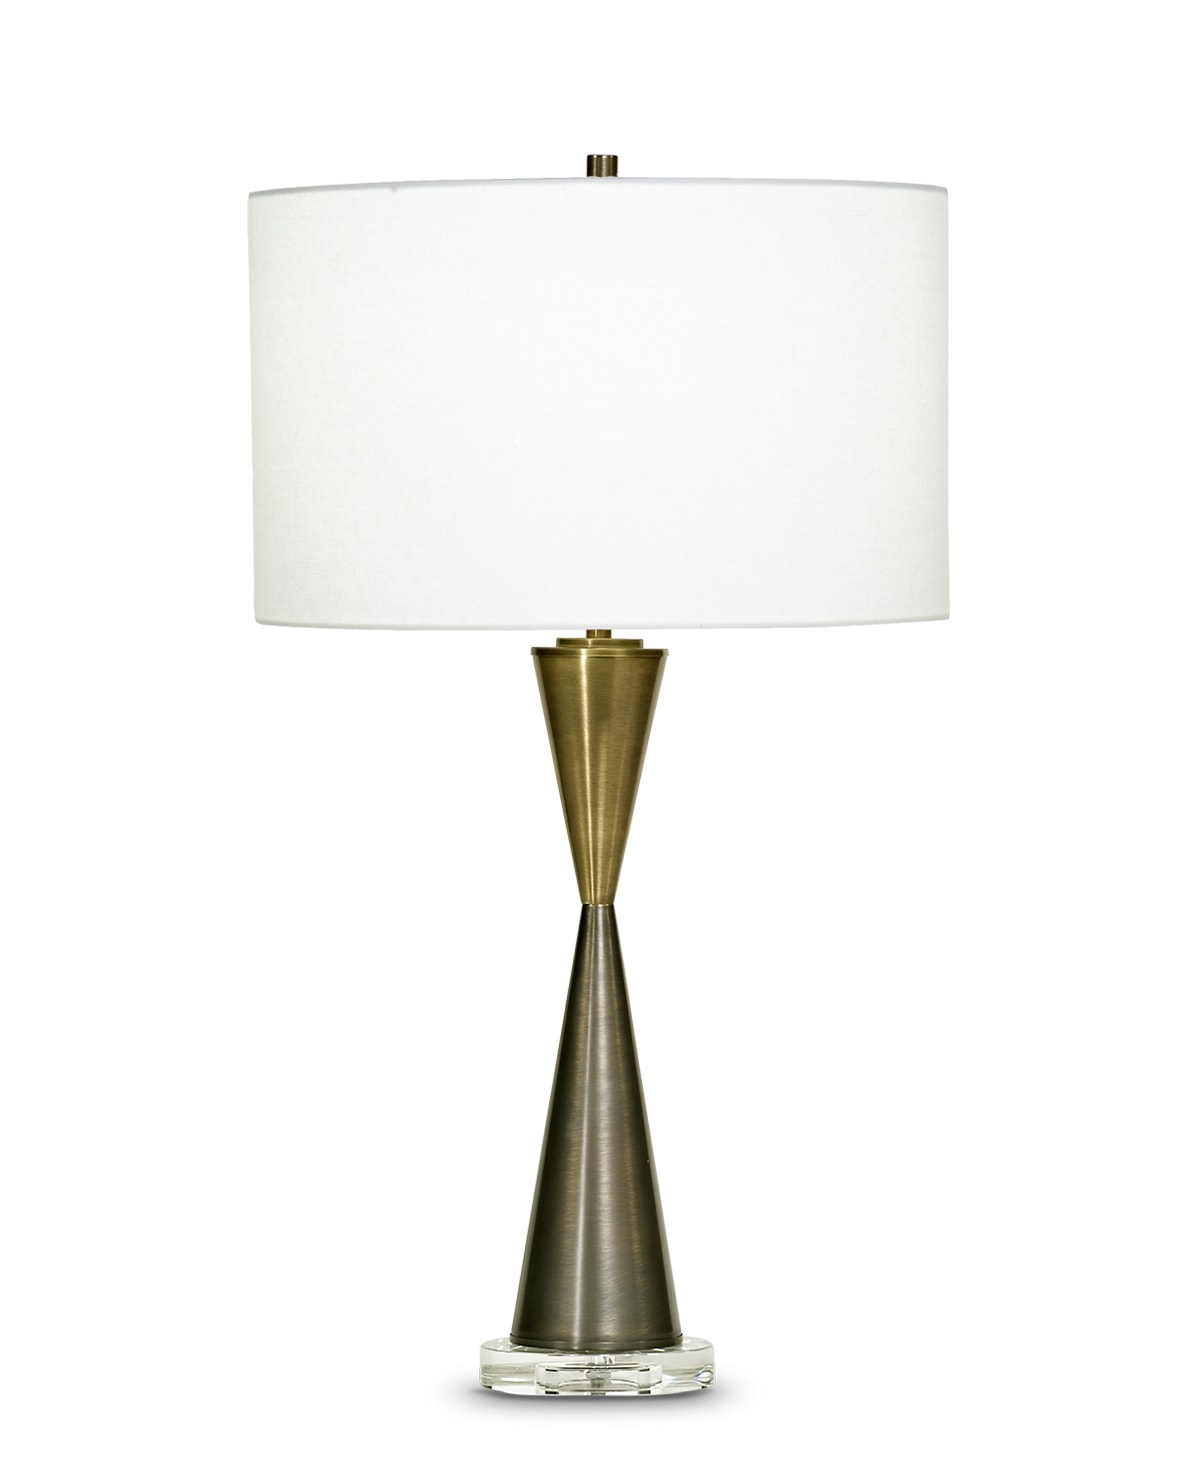 FlowDecor Magnolia Table Lamp in metal with antique brass & bronze finishes and crystal base and off-white linen drum shade (# 3709)